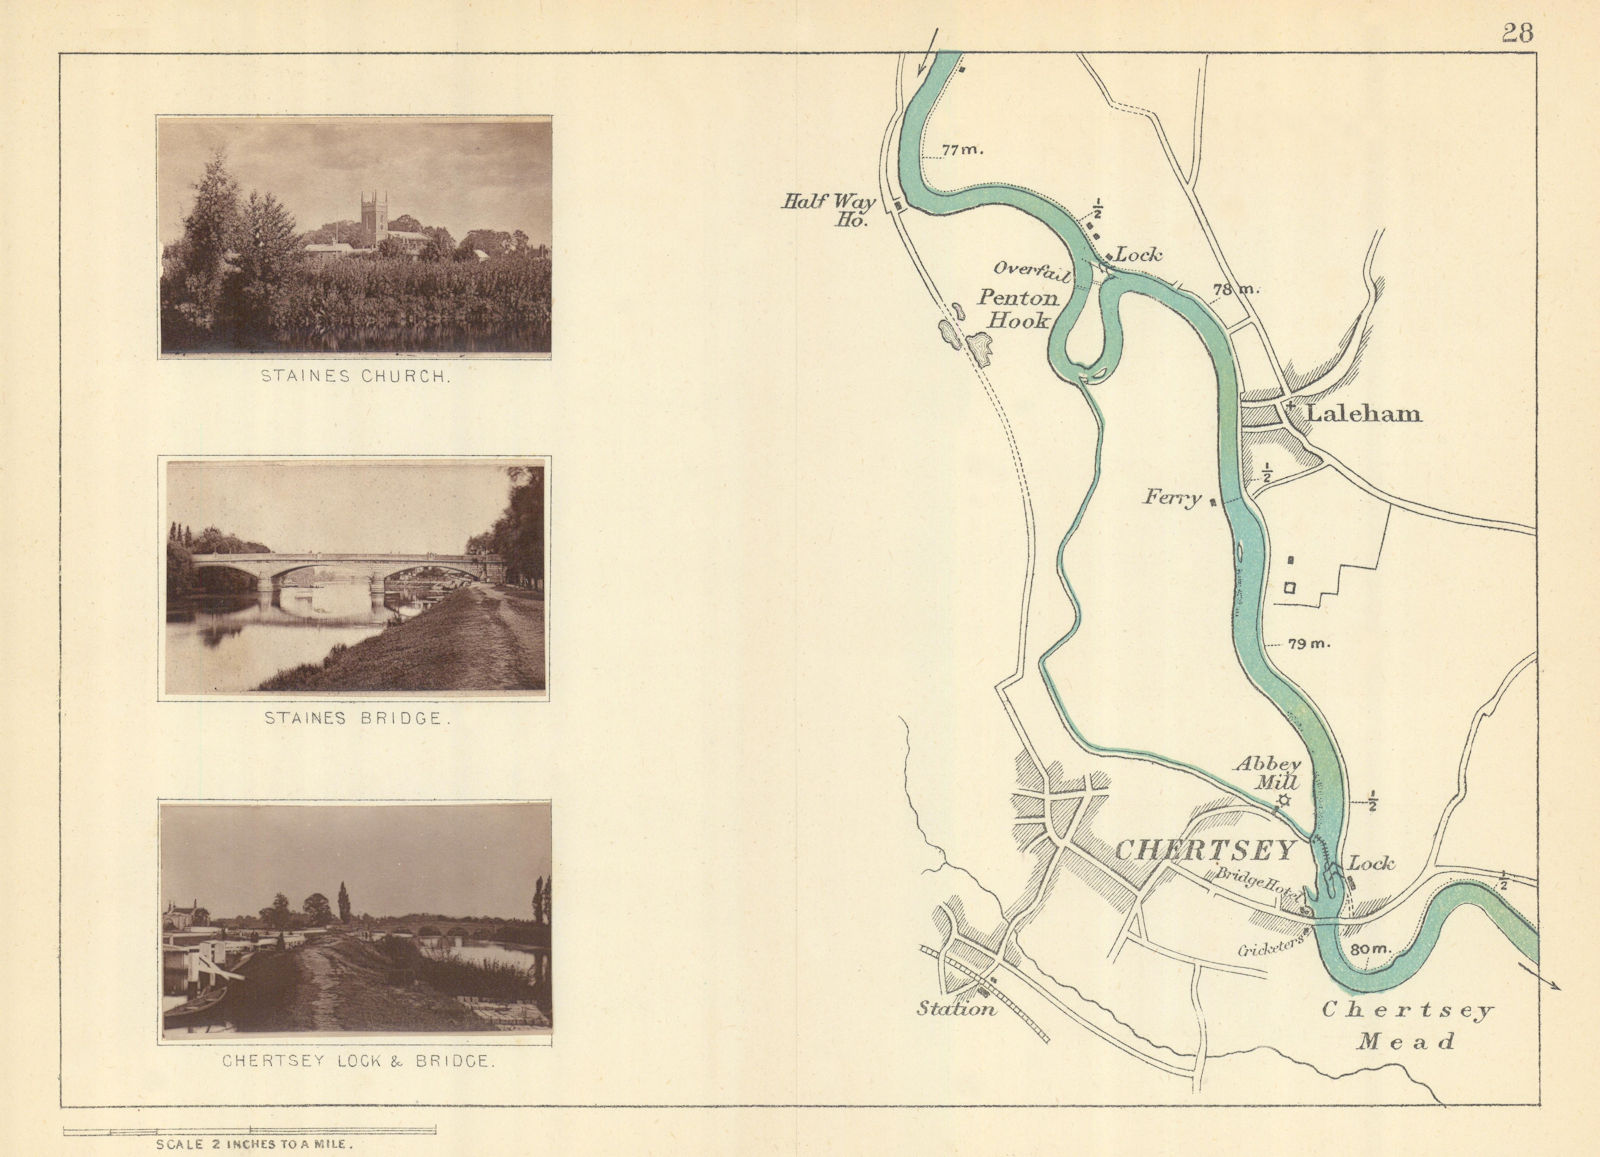 Associate Product RIVER THAMES - Laleham - Chertsey. Staines Church & Bridge. TAUNT 1879 old map